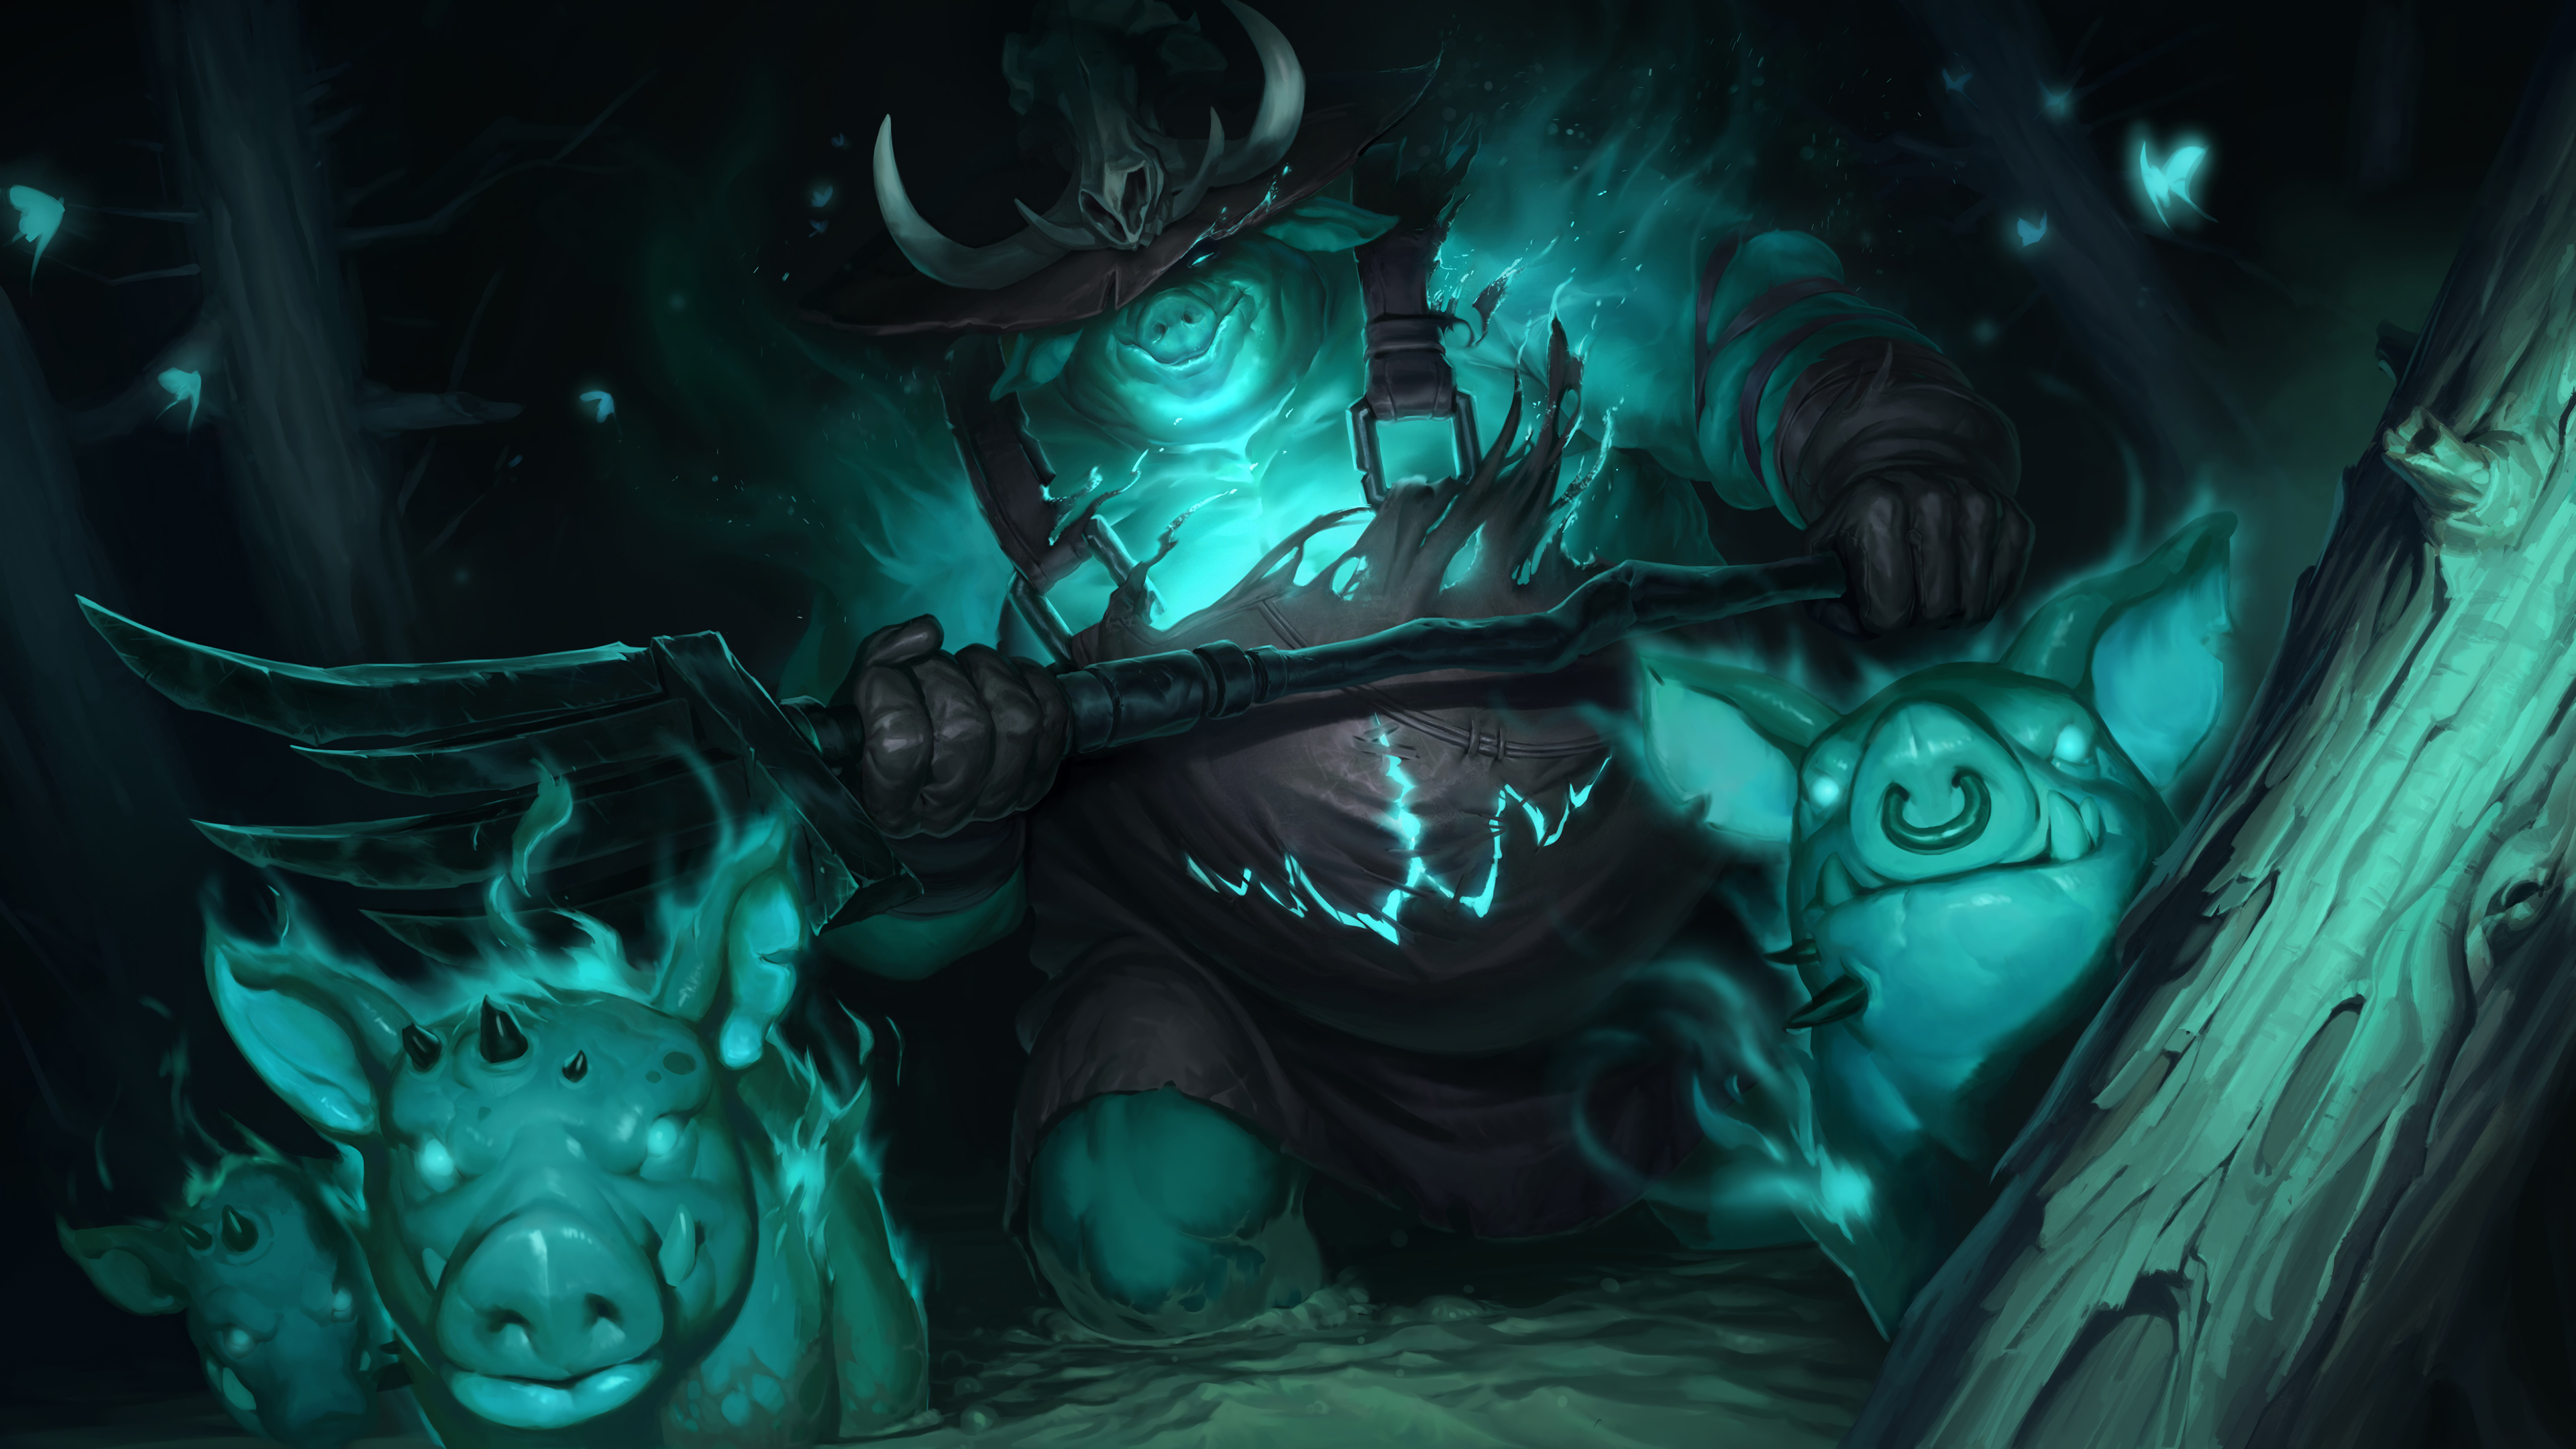 General 3840x2160 Legends of Runeterra League of Legends PC gaming fantasy art turquoise